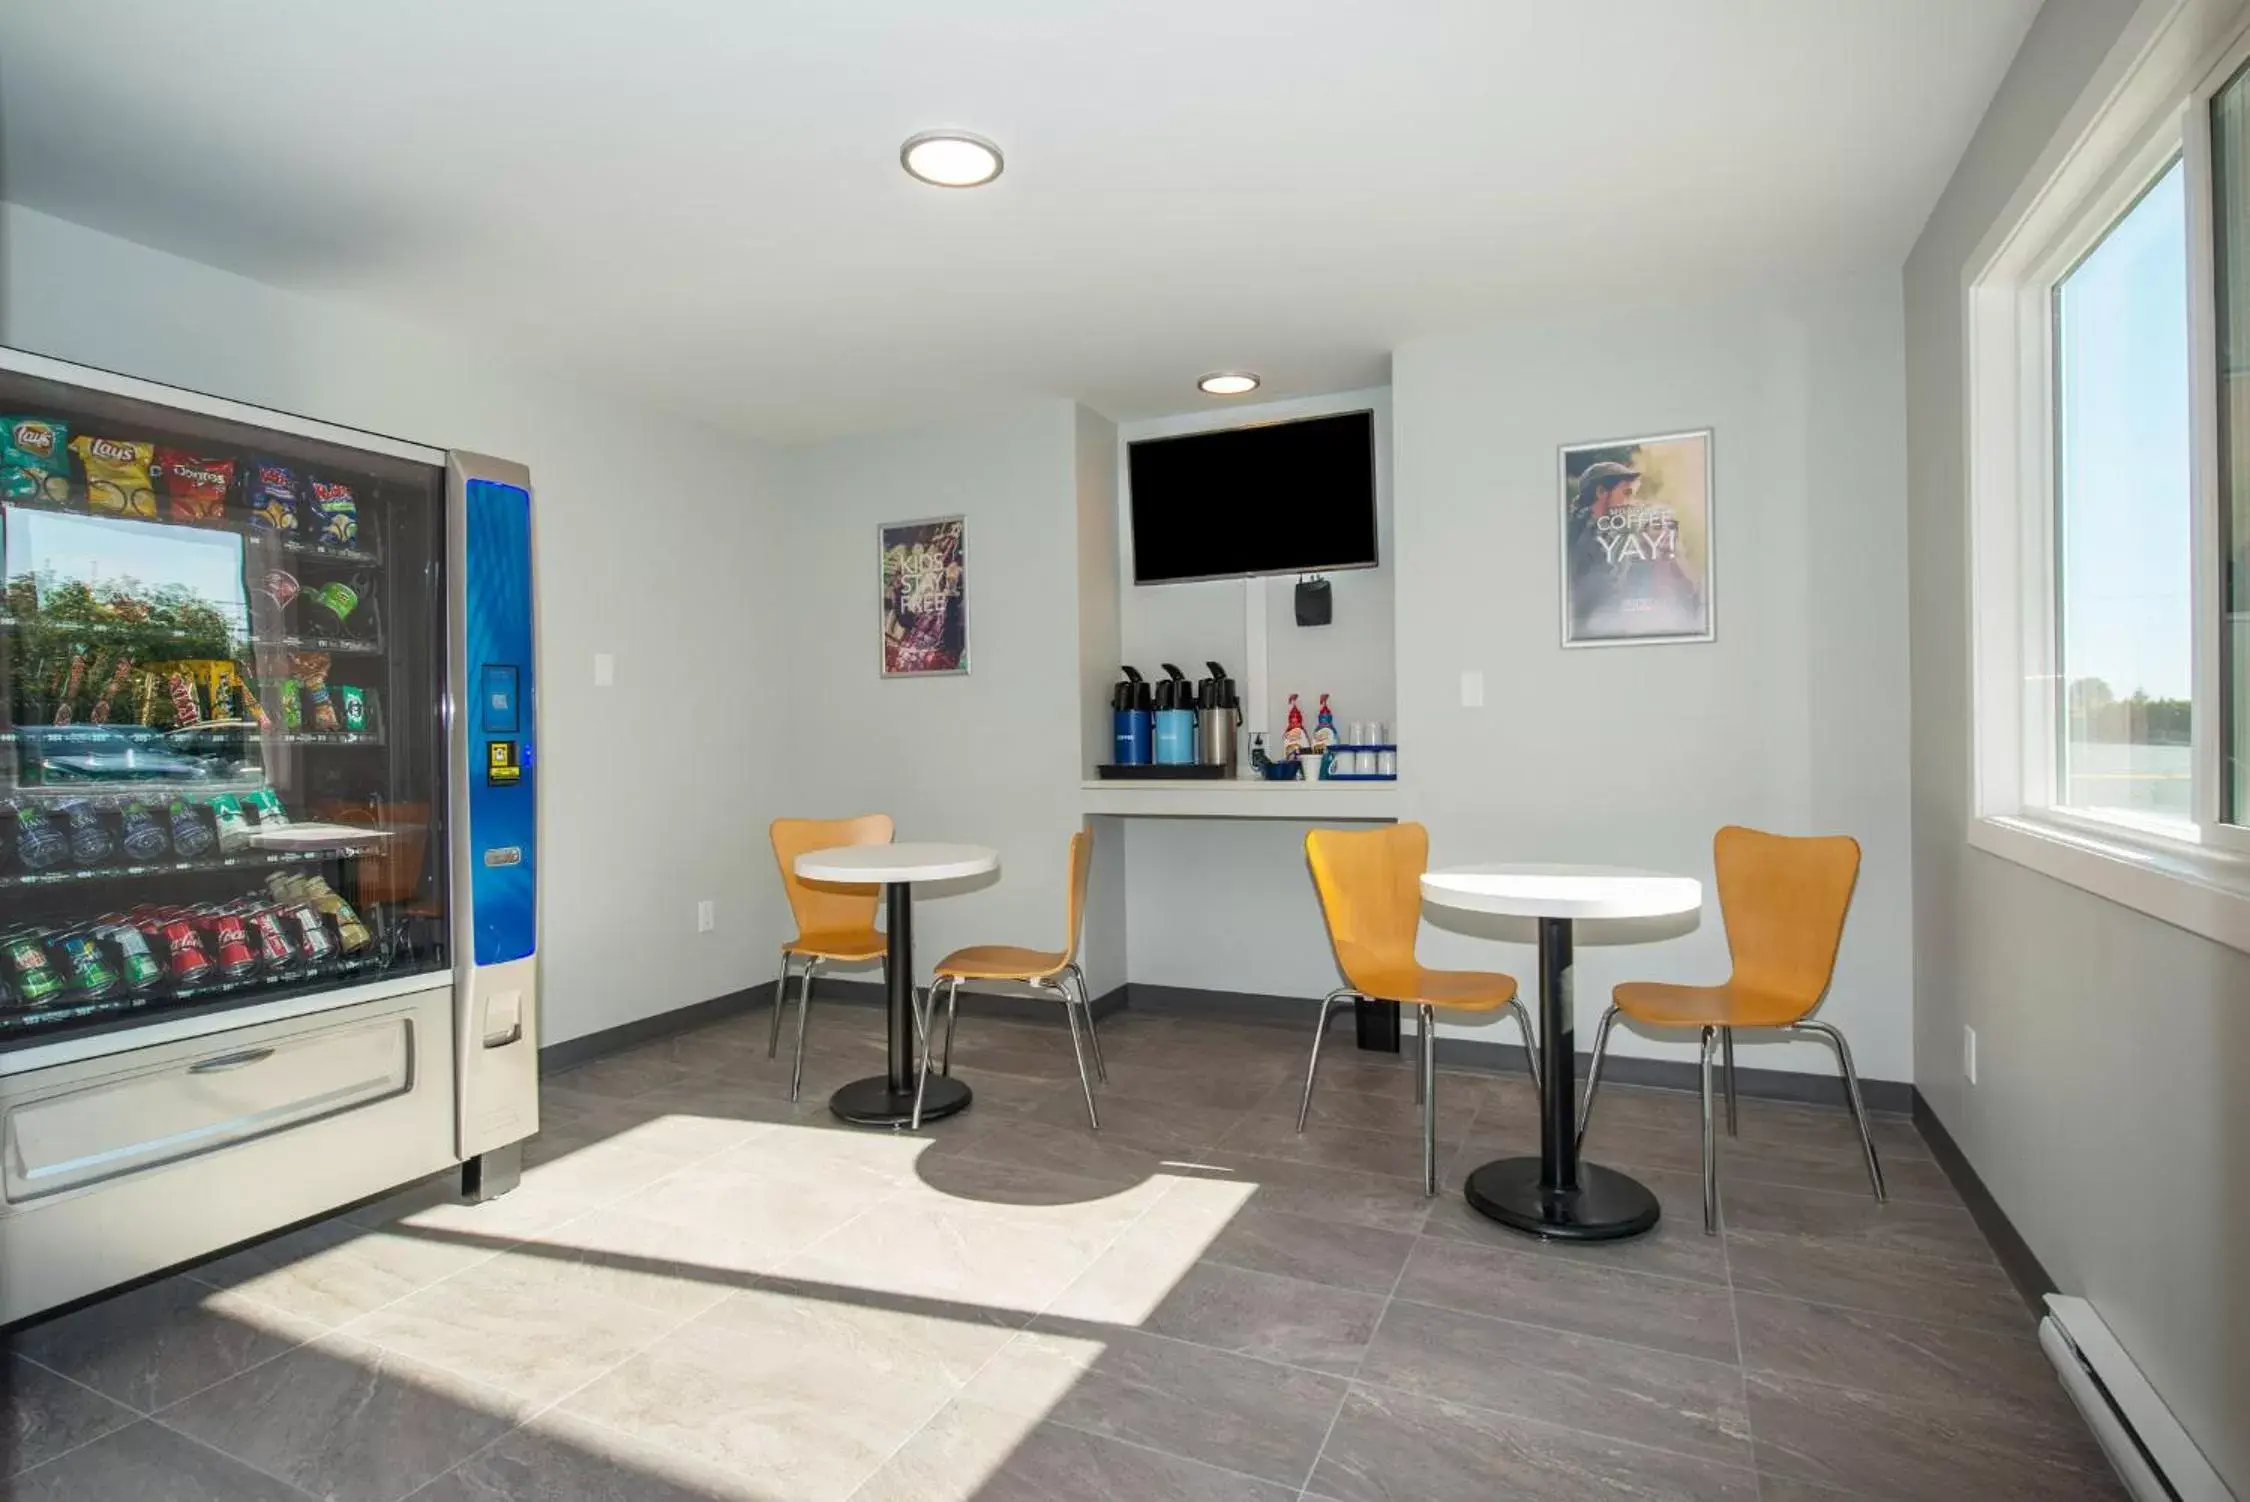 Area and facilities in Motel 6-Saanichton, BC - Victoria Airport